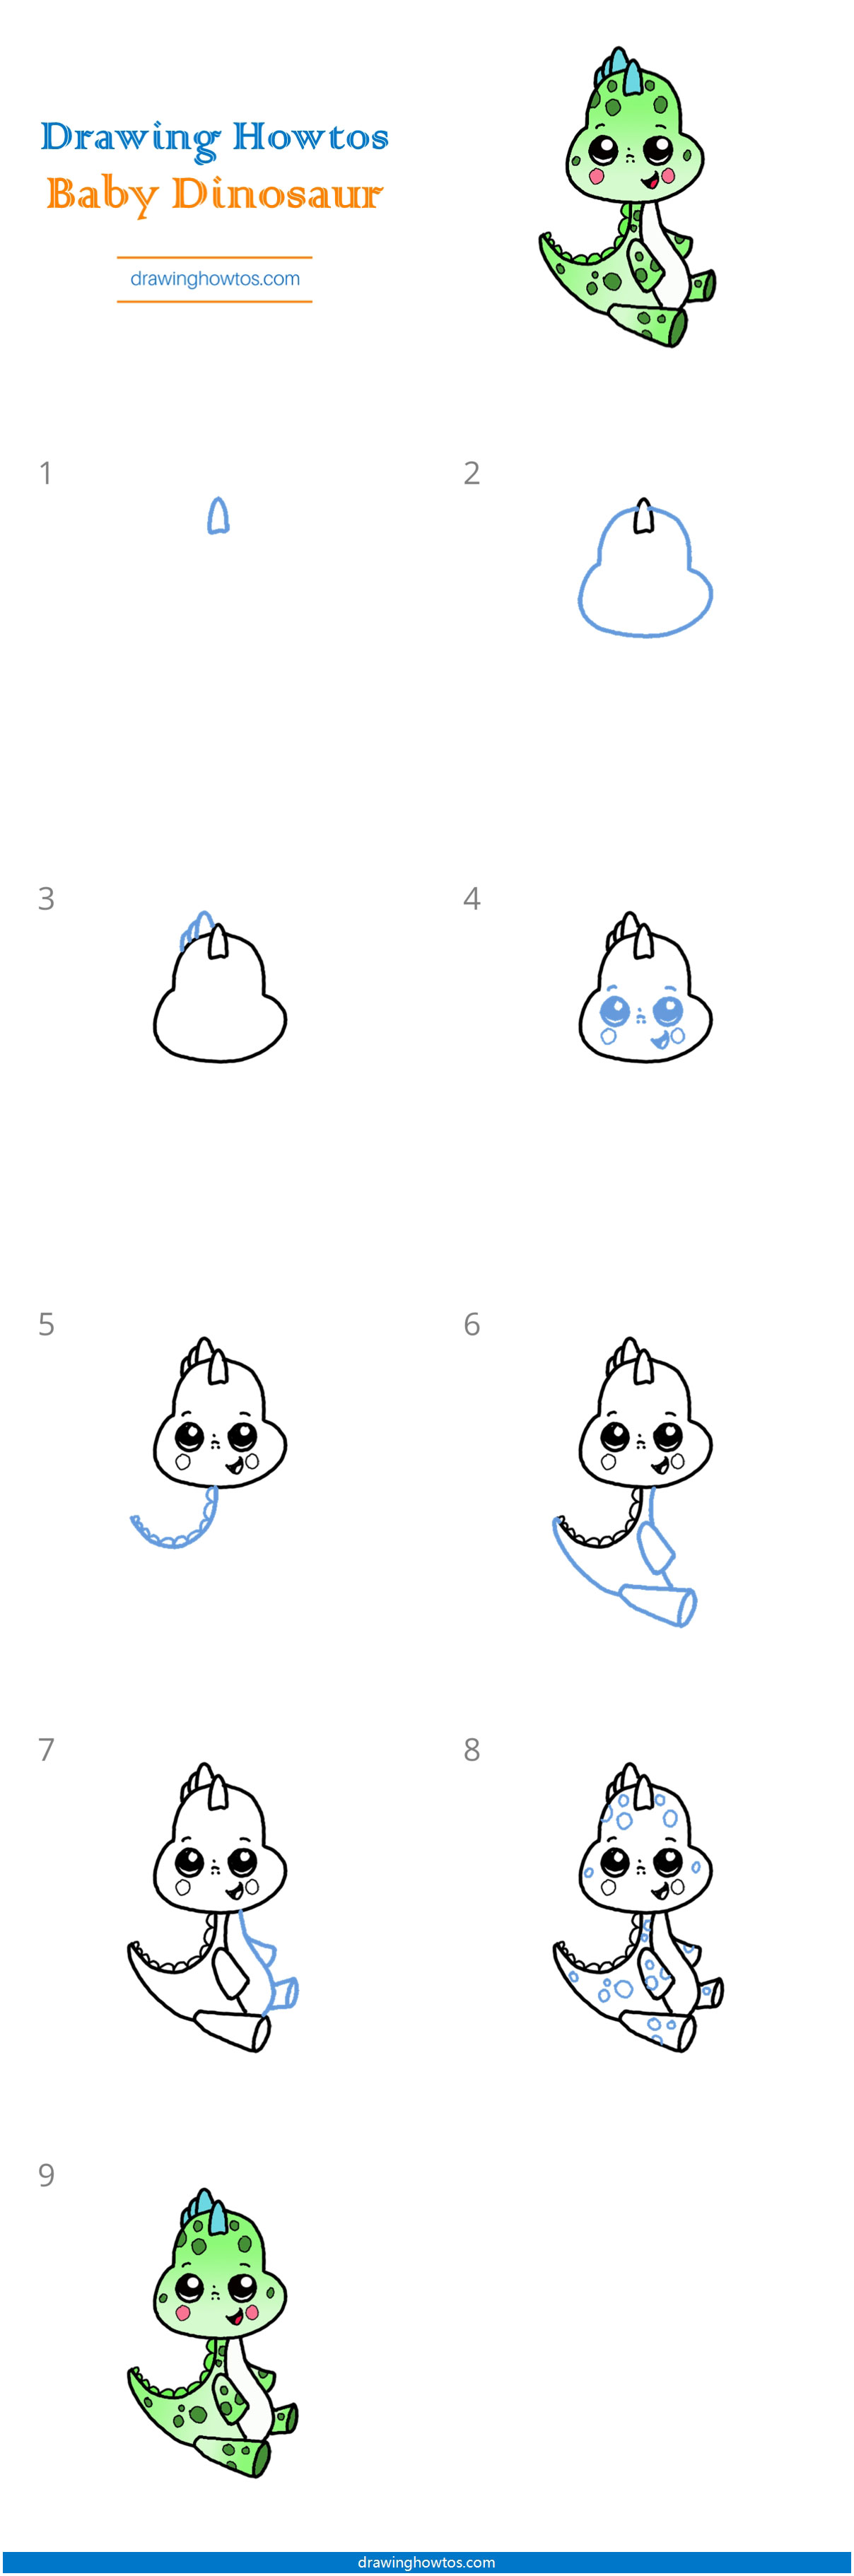 How to Draw a Baby Dinosaur Step by Step